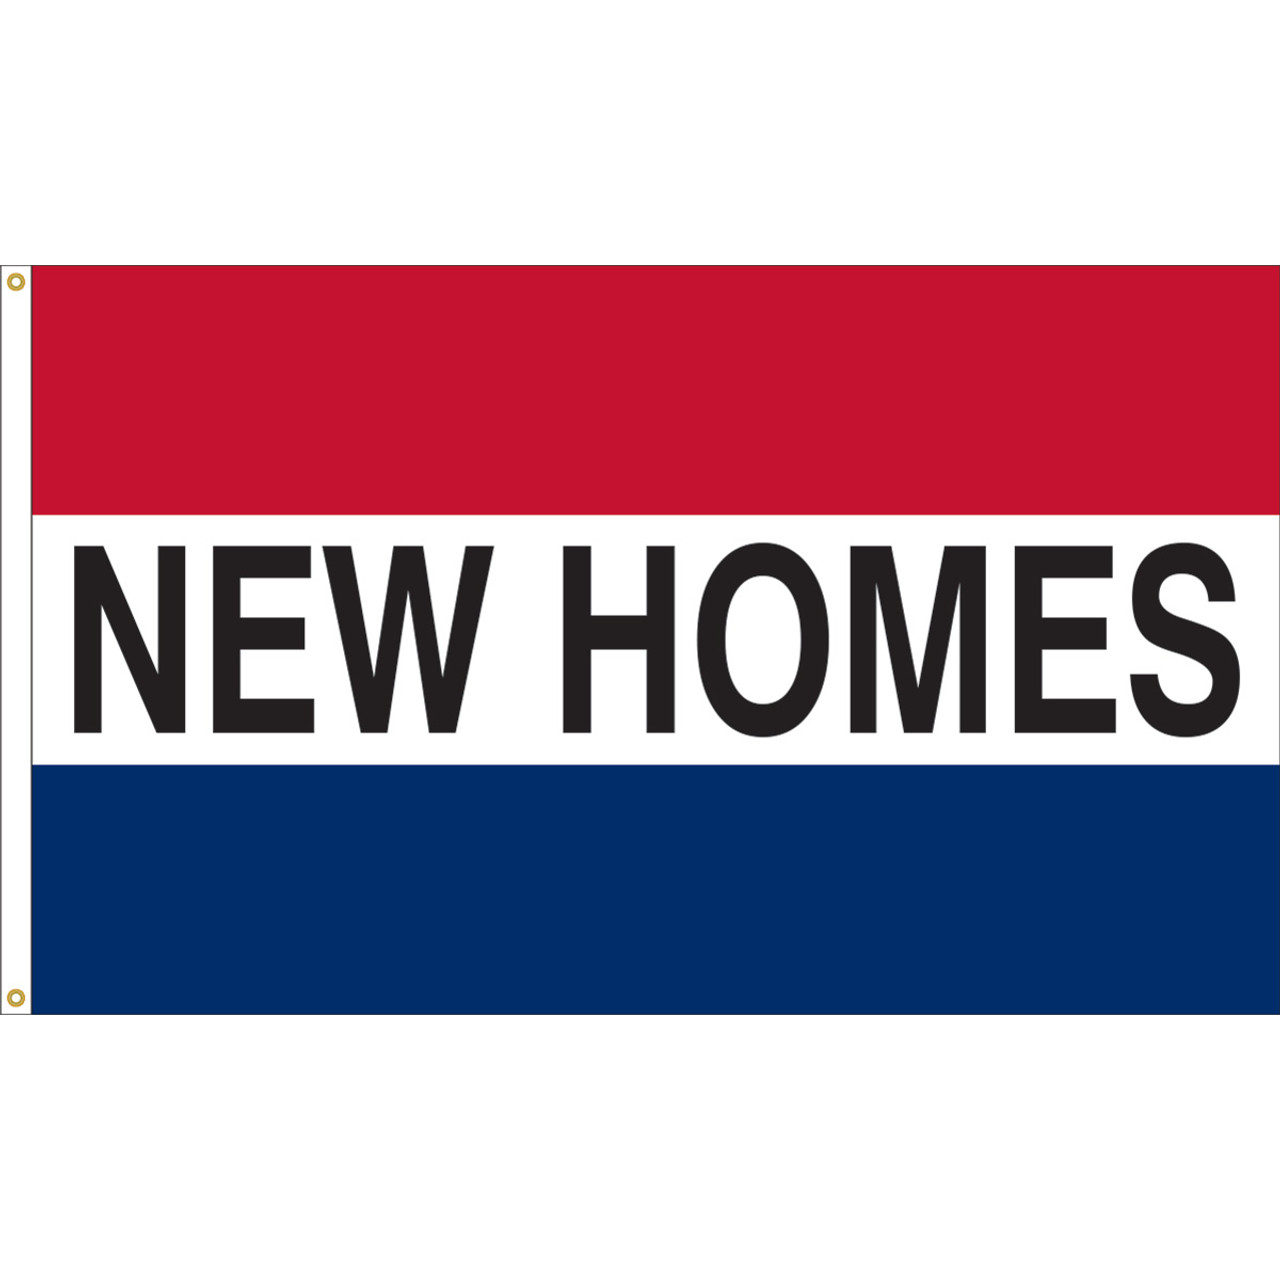 3' x 5' Message Flag "NEW HOMES" Red/White/Blue Nylon with Header and Grommets, 120045